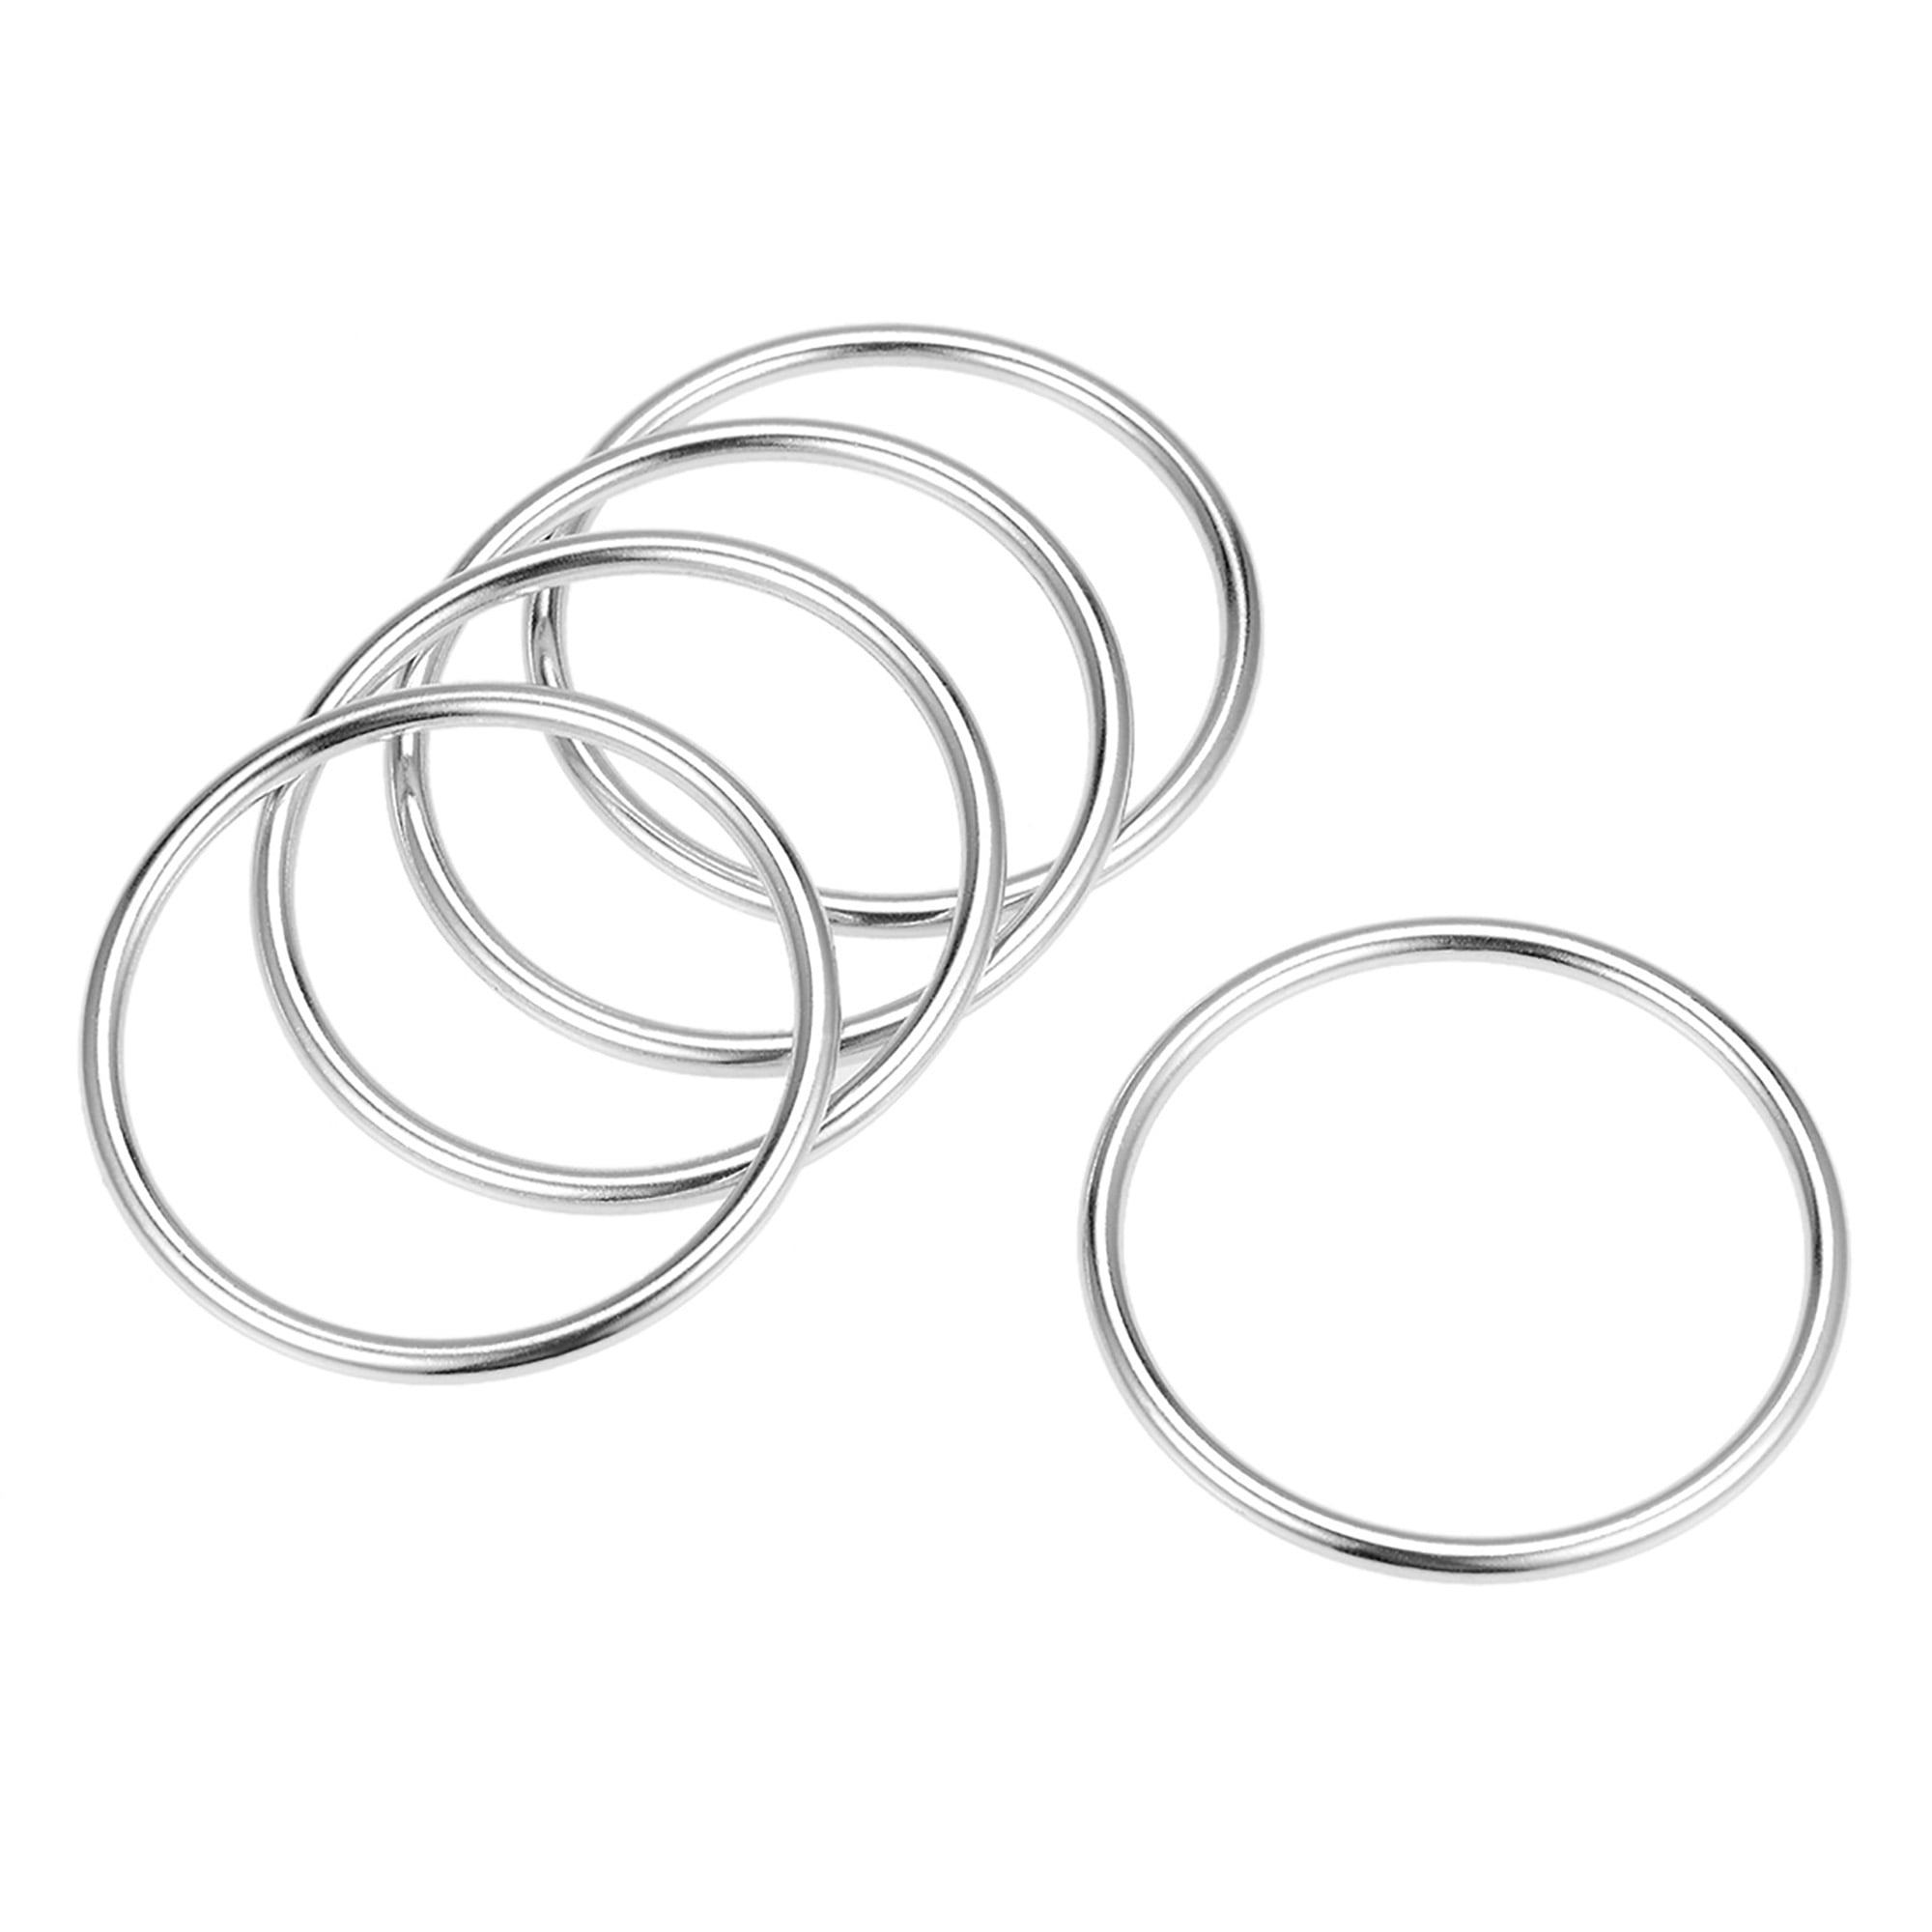 5Pcs O Ring Buckle 1.8-Inch(45mm) Zinc Alloy O-Rings Silver Tone for ...